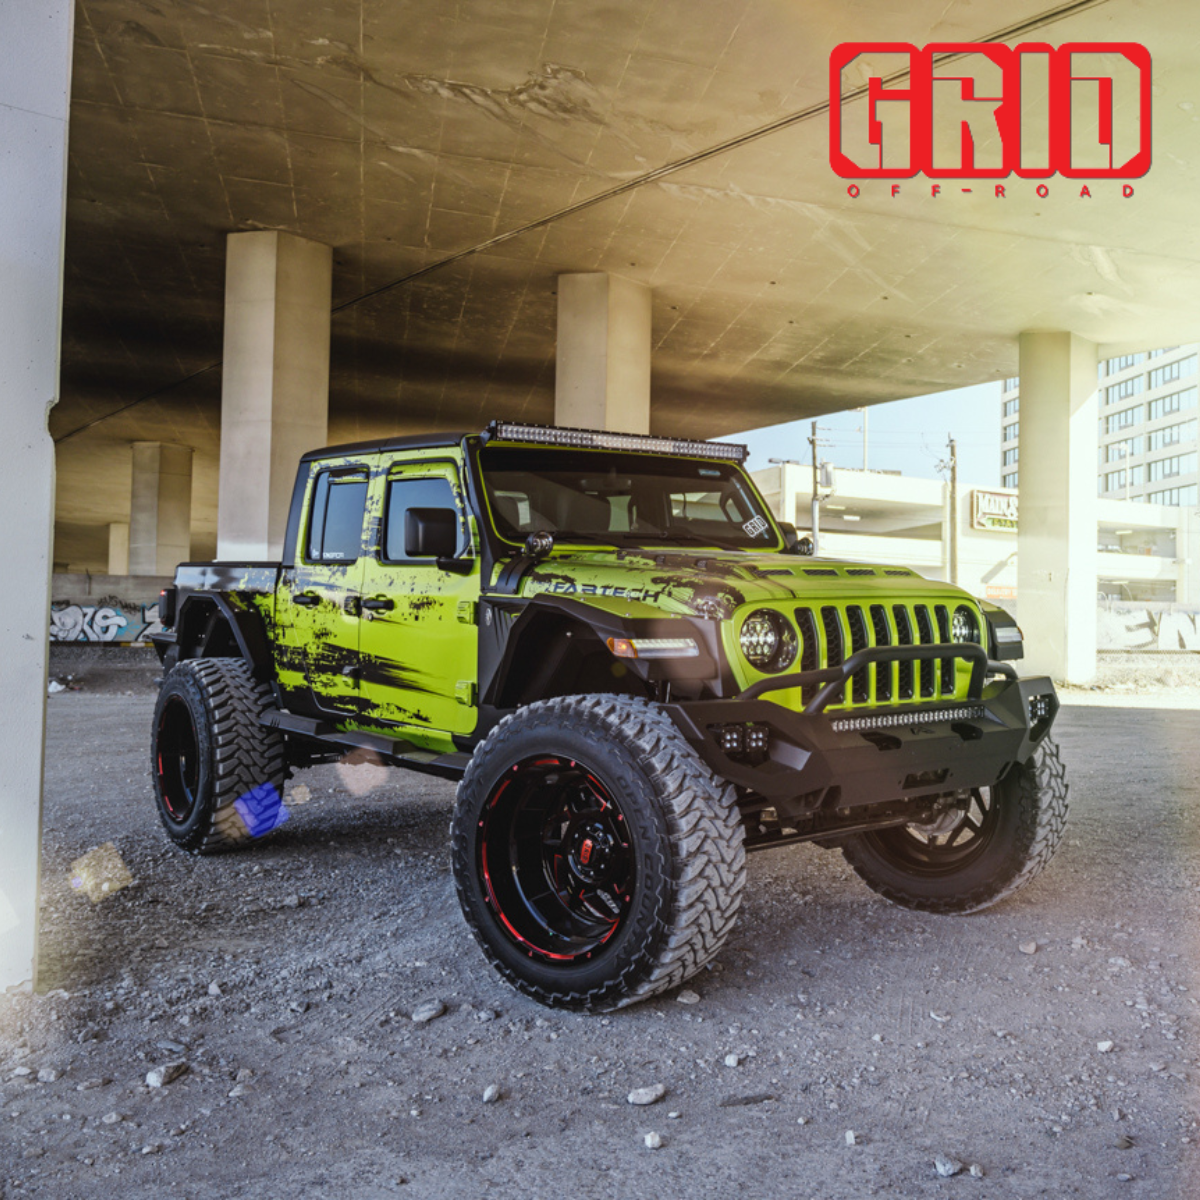 Customize your ride with Grid Off Road’s GD14 Wheels. Grid Off Road’s GD14 series directional inserts come in either chrome, black, carbon fiber or they can be color matched. These 1-piece cast wheels have vehicle specific bolt pattern, center bore and are TPMS compatible. Stop in and make a statement with GRID Off-Road’s Gd14 Wheels.